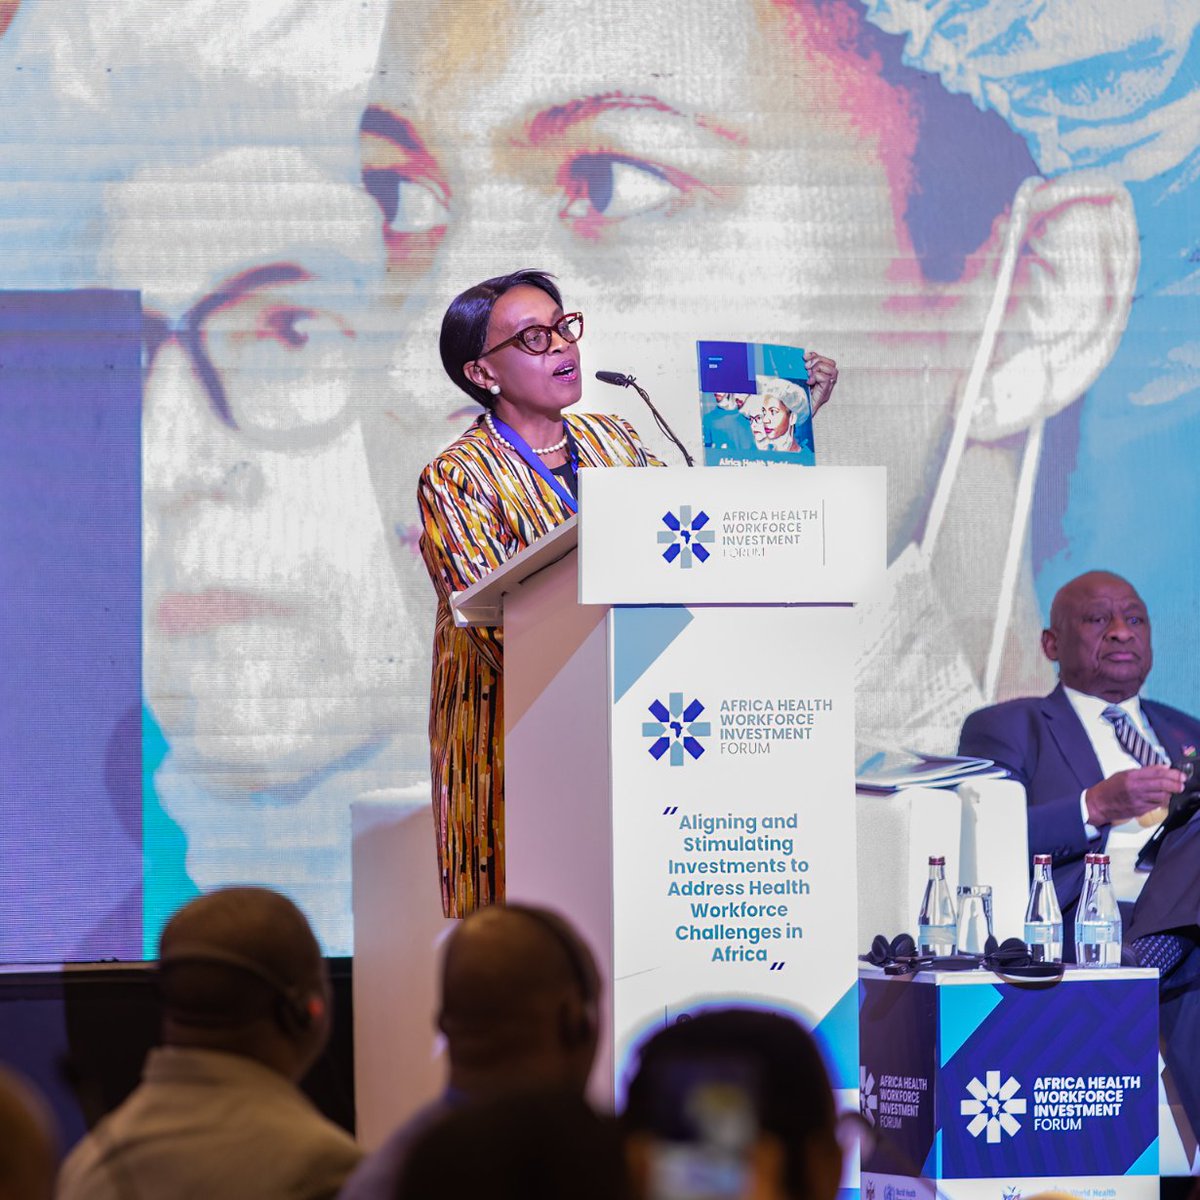 Today, in a major step forward for public health in the African region, @WHOAFRO, governments & partners launched the Africa Health Workforce Investment Charter, with the strong ambition to reinforce, grow and retain the health labour force. Read more: afro.who.int/sites/default/…